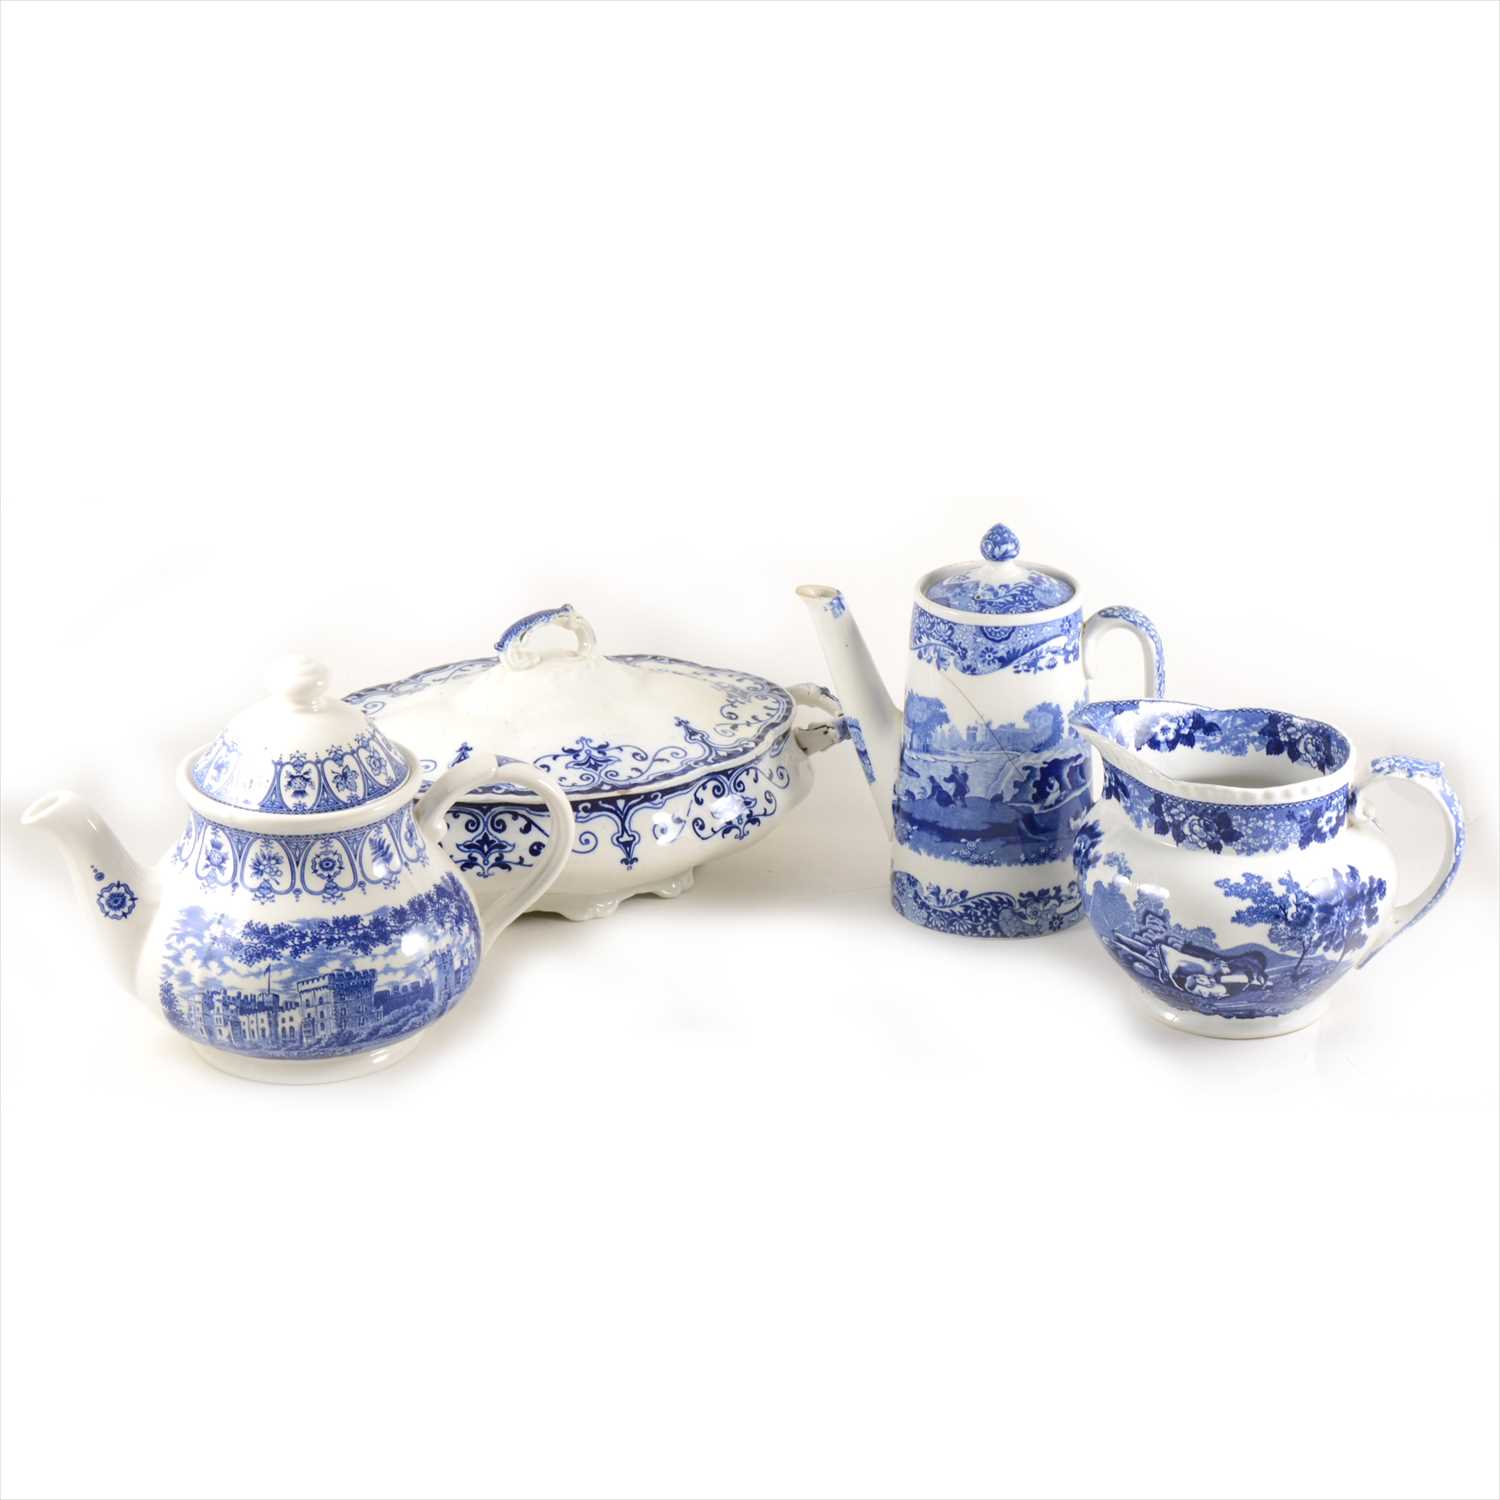 Lot 59 - A collection of Staffordshire Willow pattern and other transferware, etc.